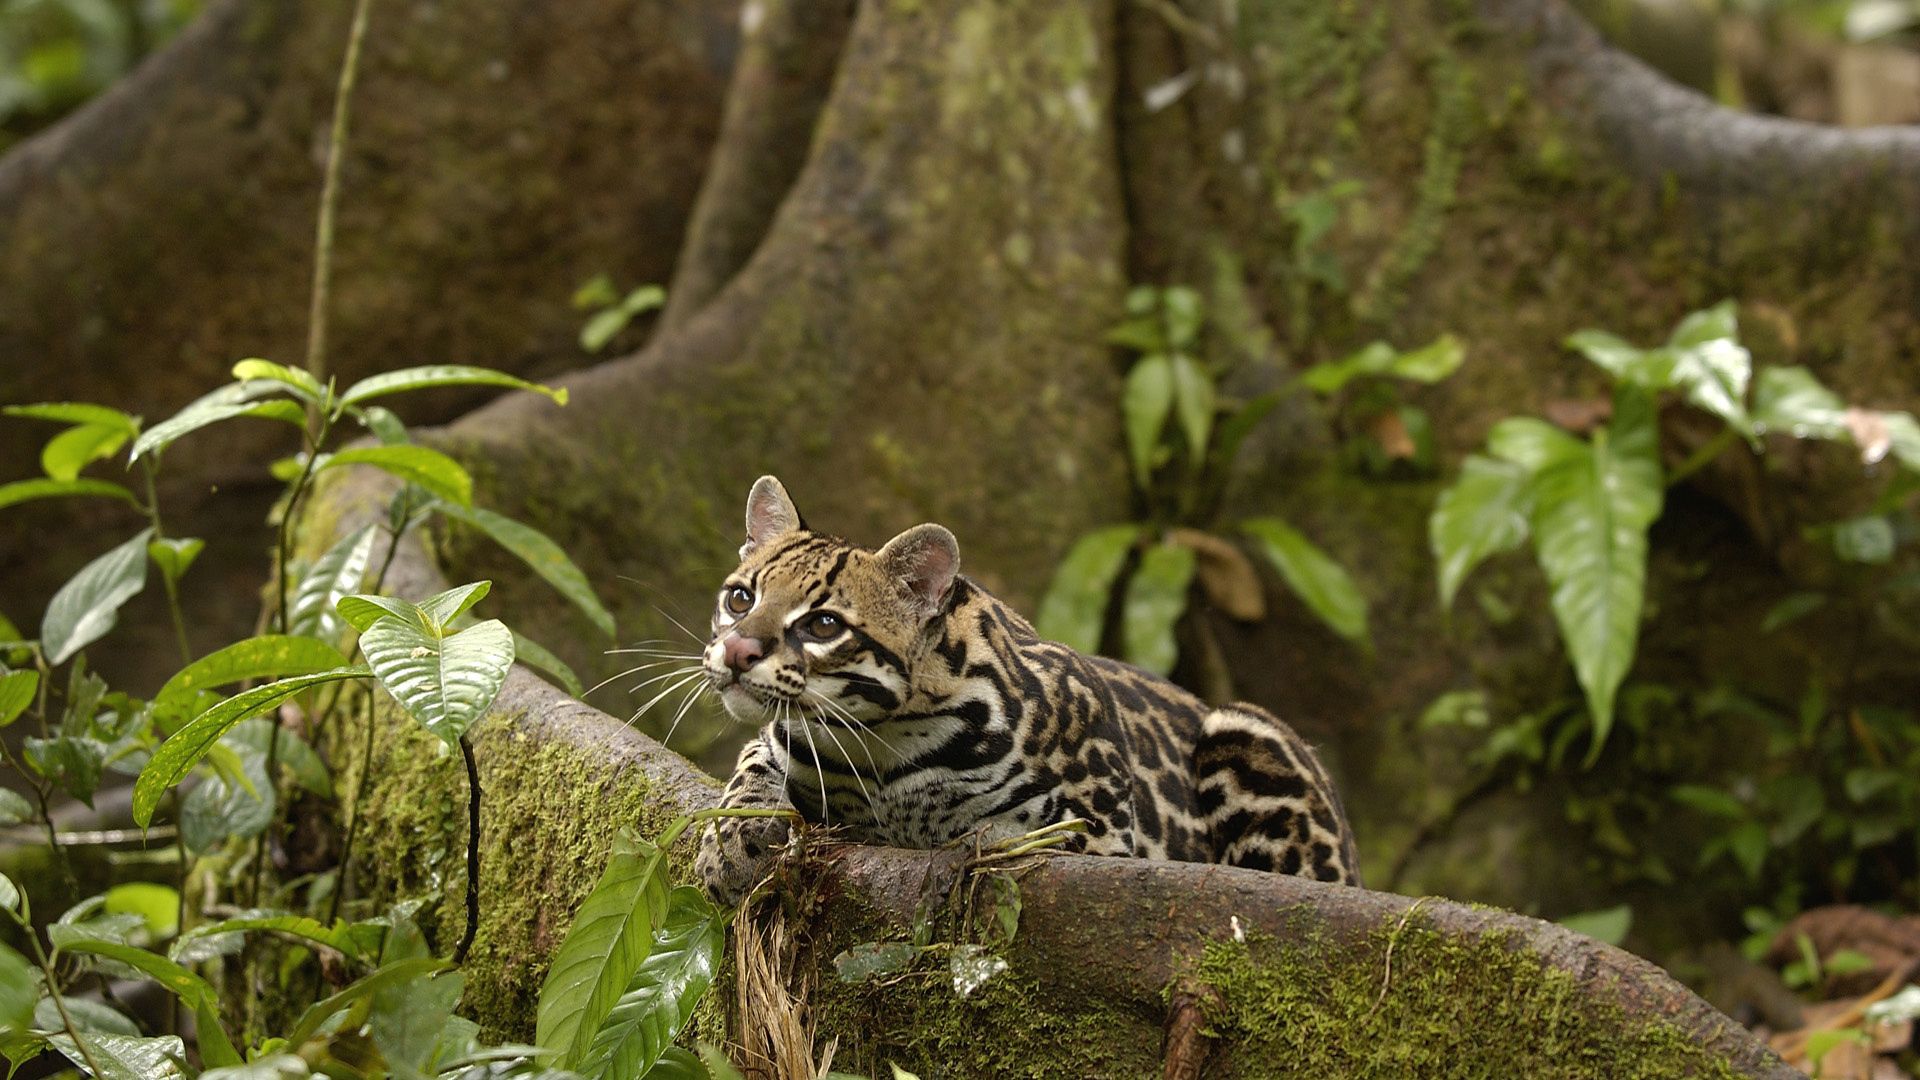 140589 Screensavers and Wallpapers Wild Cat for phone. Download animals, foliage, wild cat, jungle pictures for free